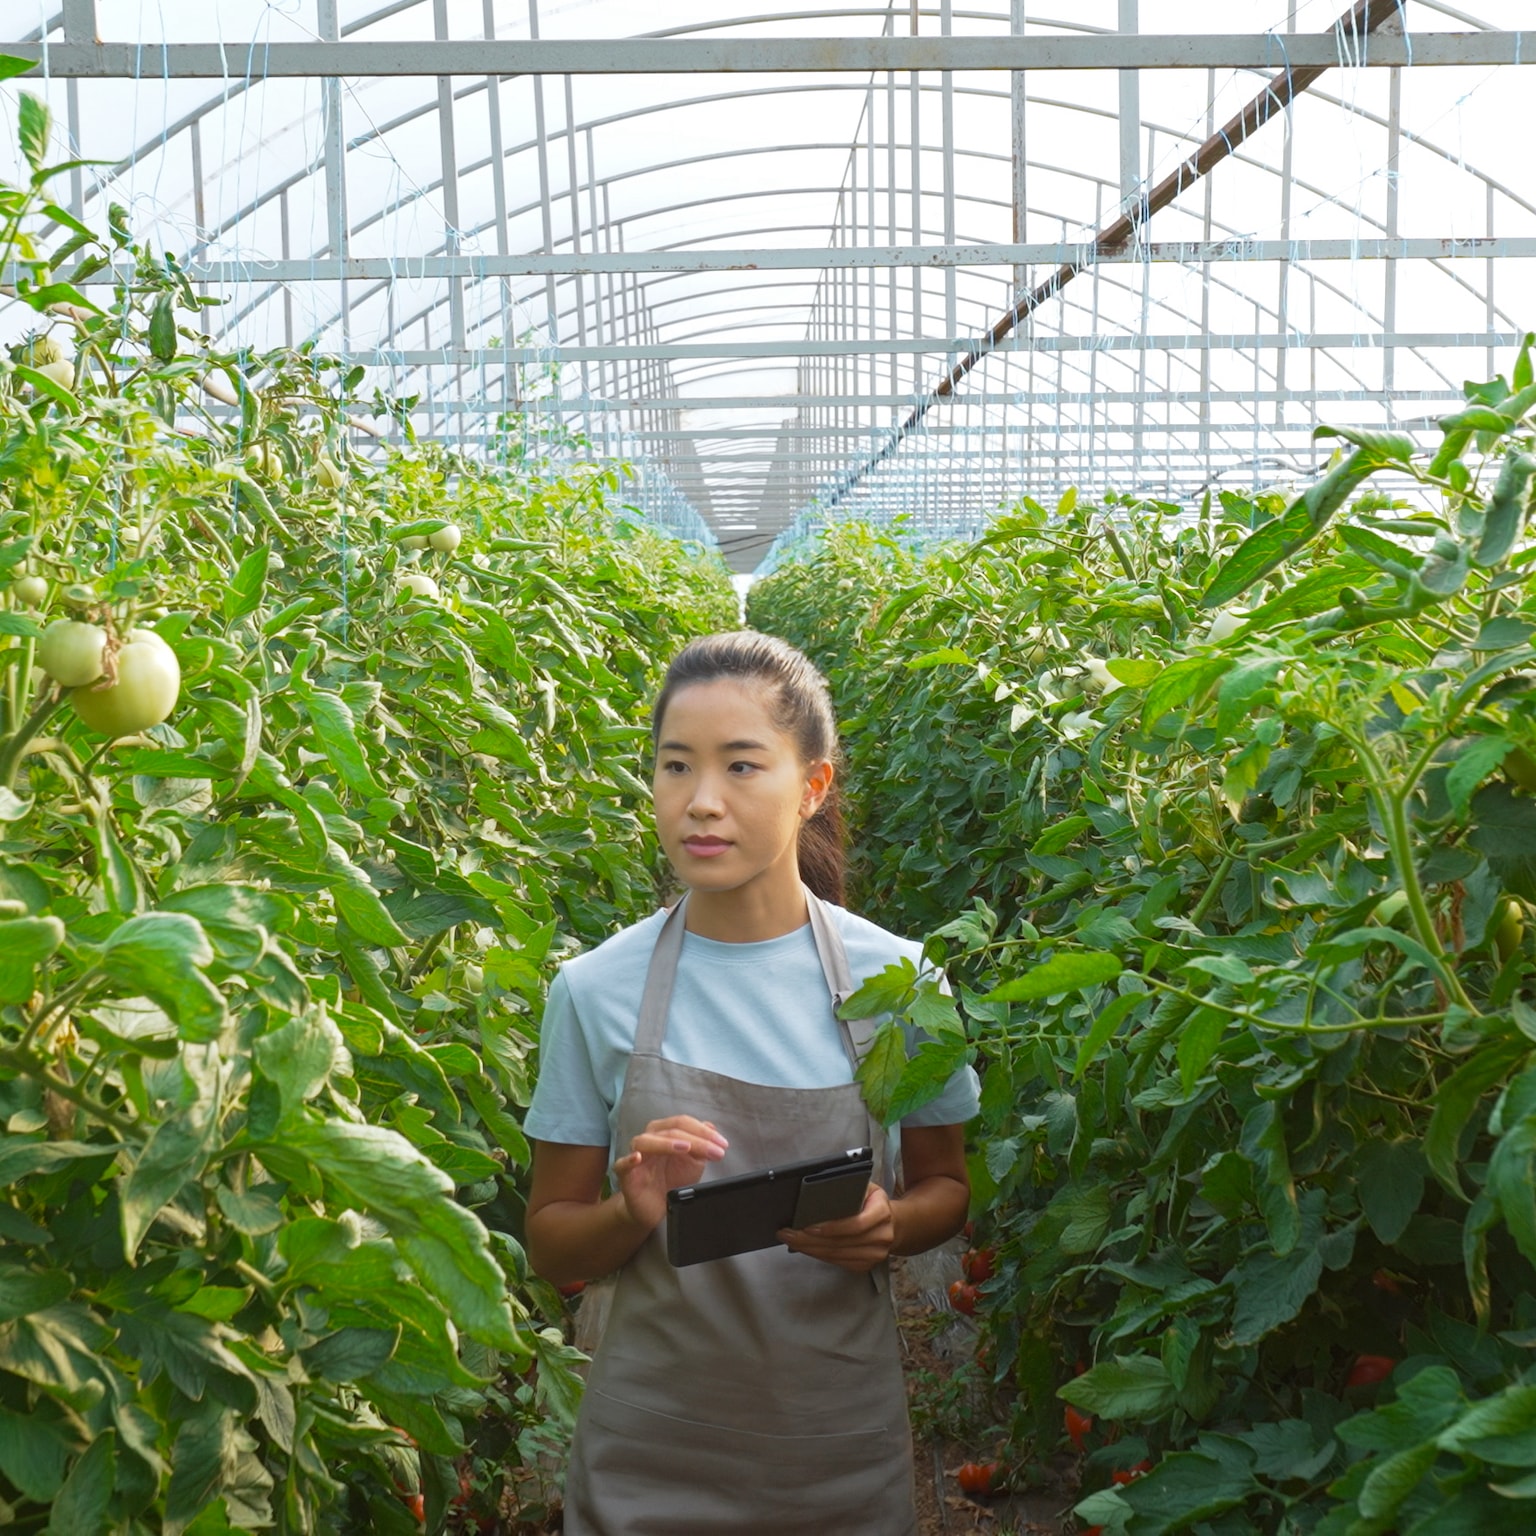 A woman standing in a greenhouse surrounded by a tomato crop